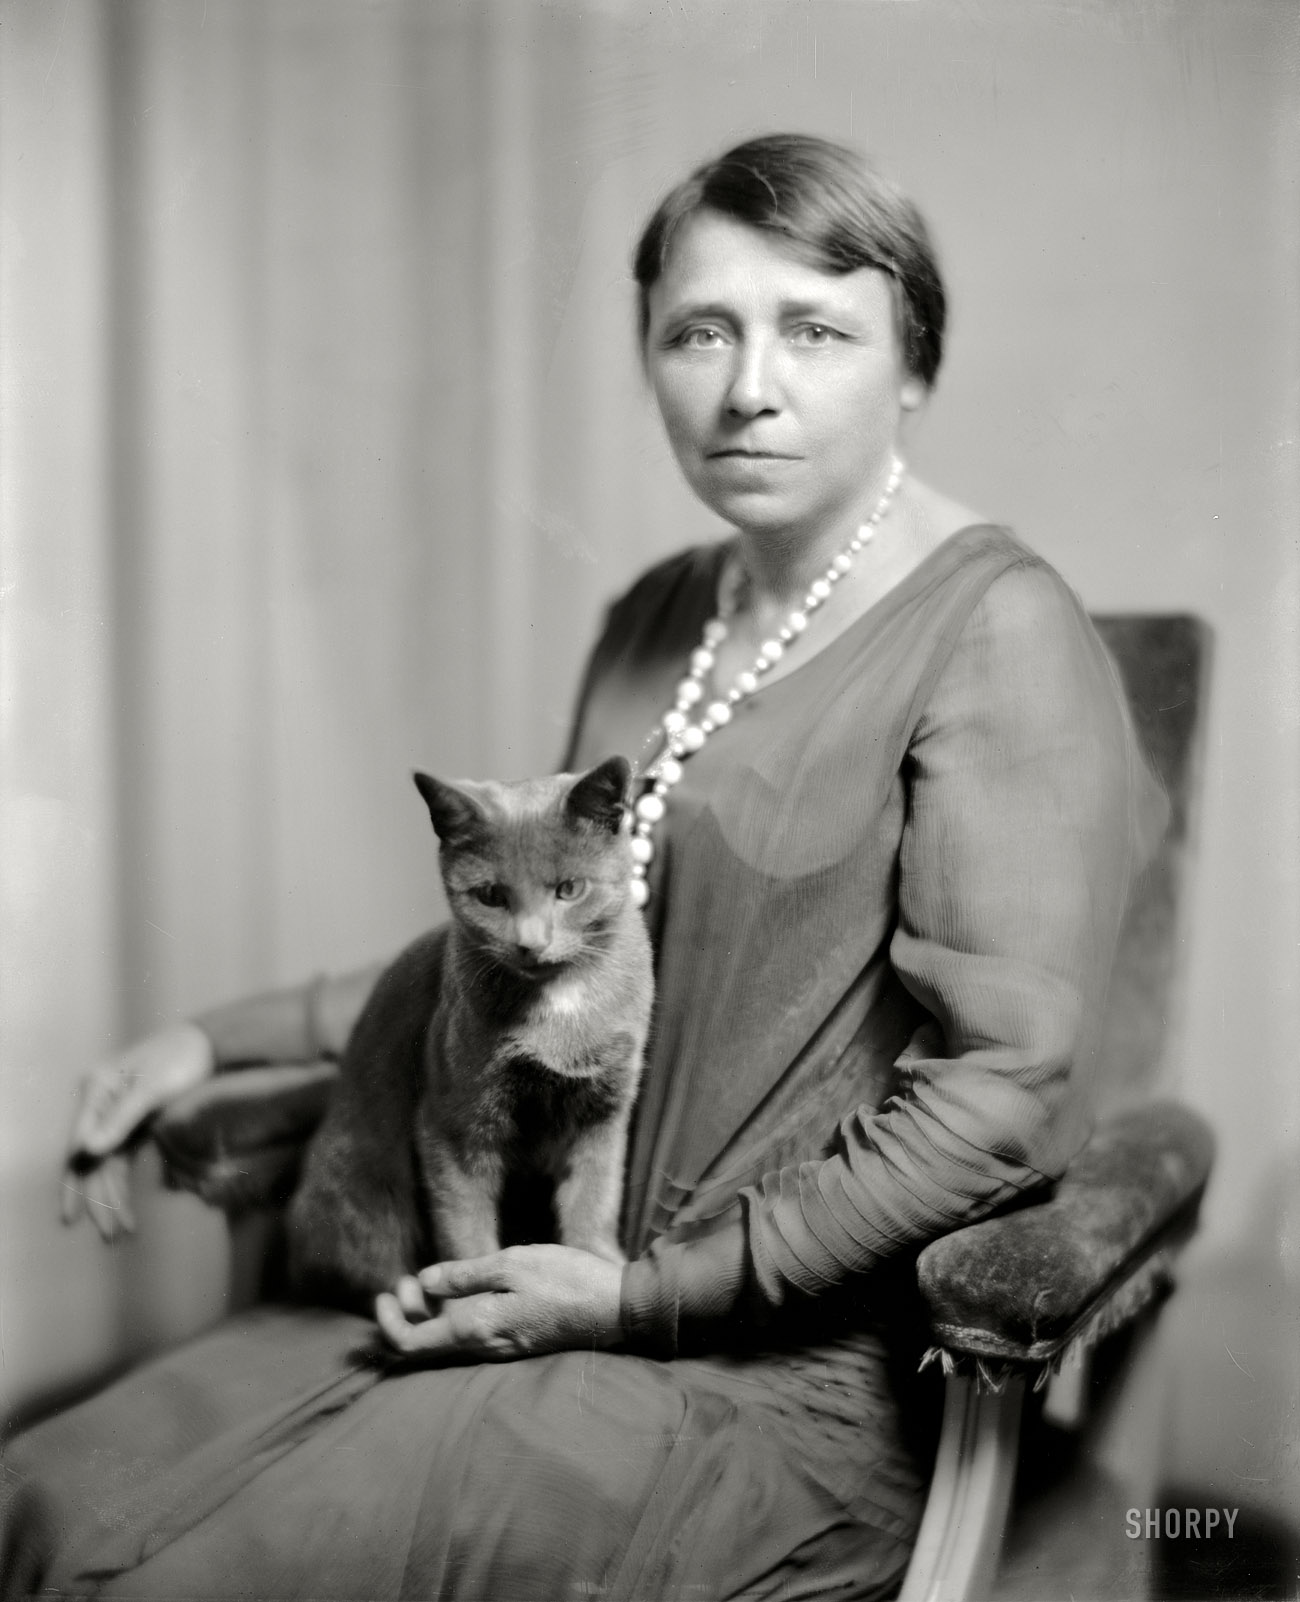 Washington, D.C., circa 1925. "Mrs. Thaddeus Caraway and cat." The cat's accomplishments are lost to history, but Hattie Caraway went on to become a two-term U.S. Senator, the first woman ever elected to that office. View full size.